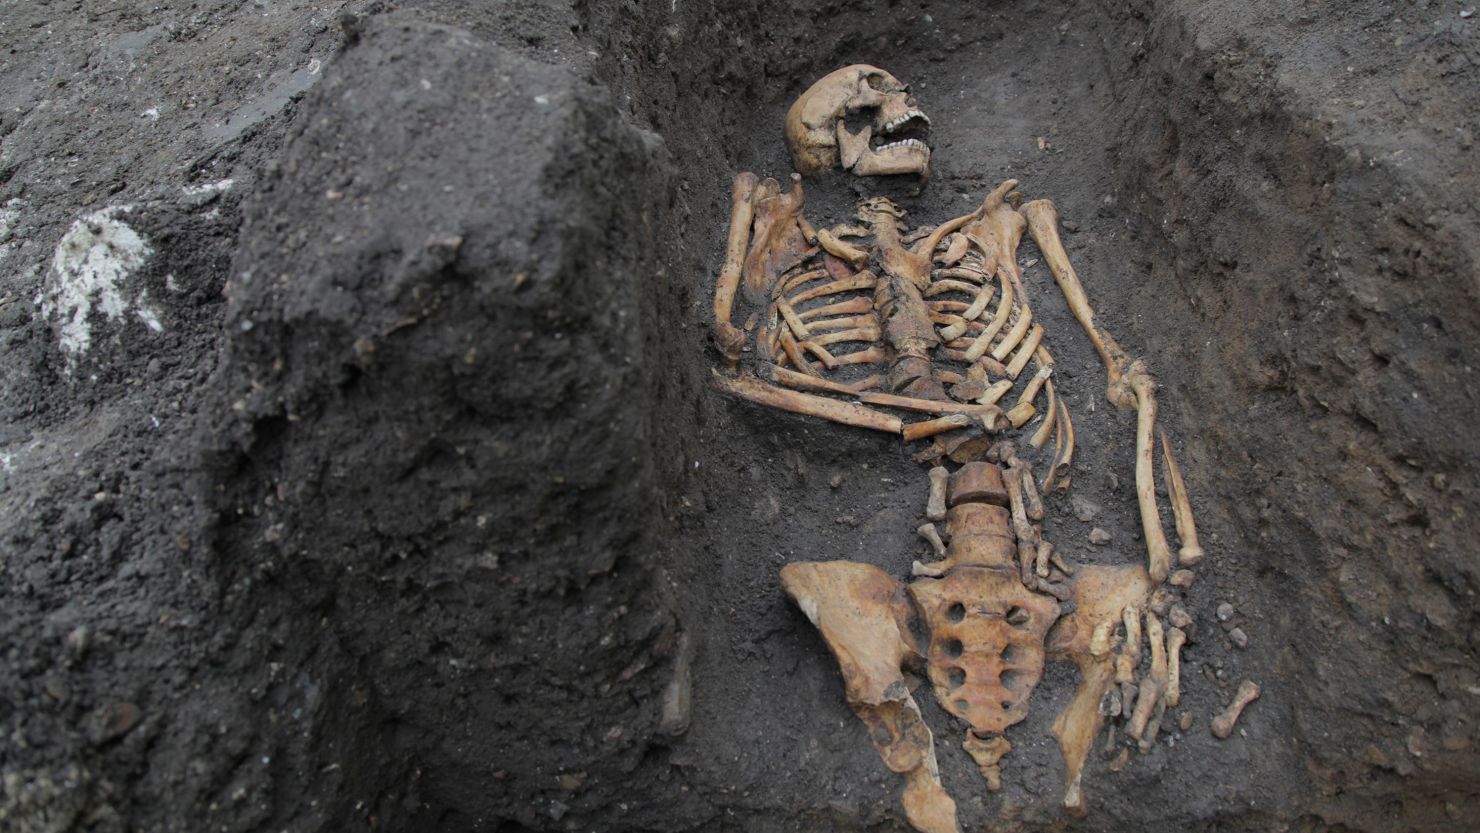 The remains of an individual buried in Cambridge's  Augustinian friary are shown here.